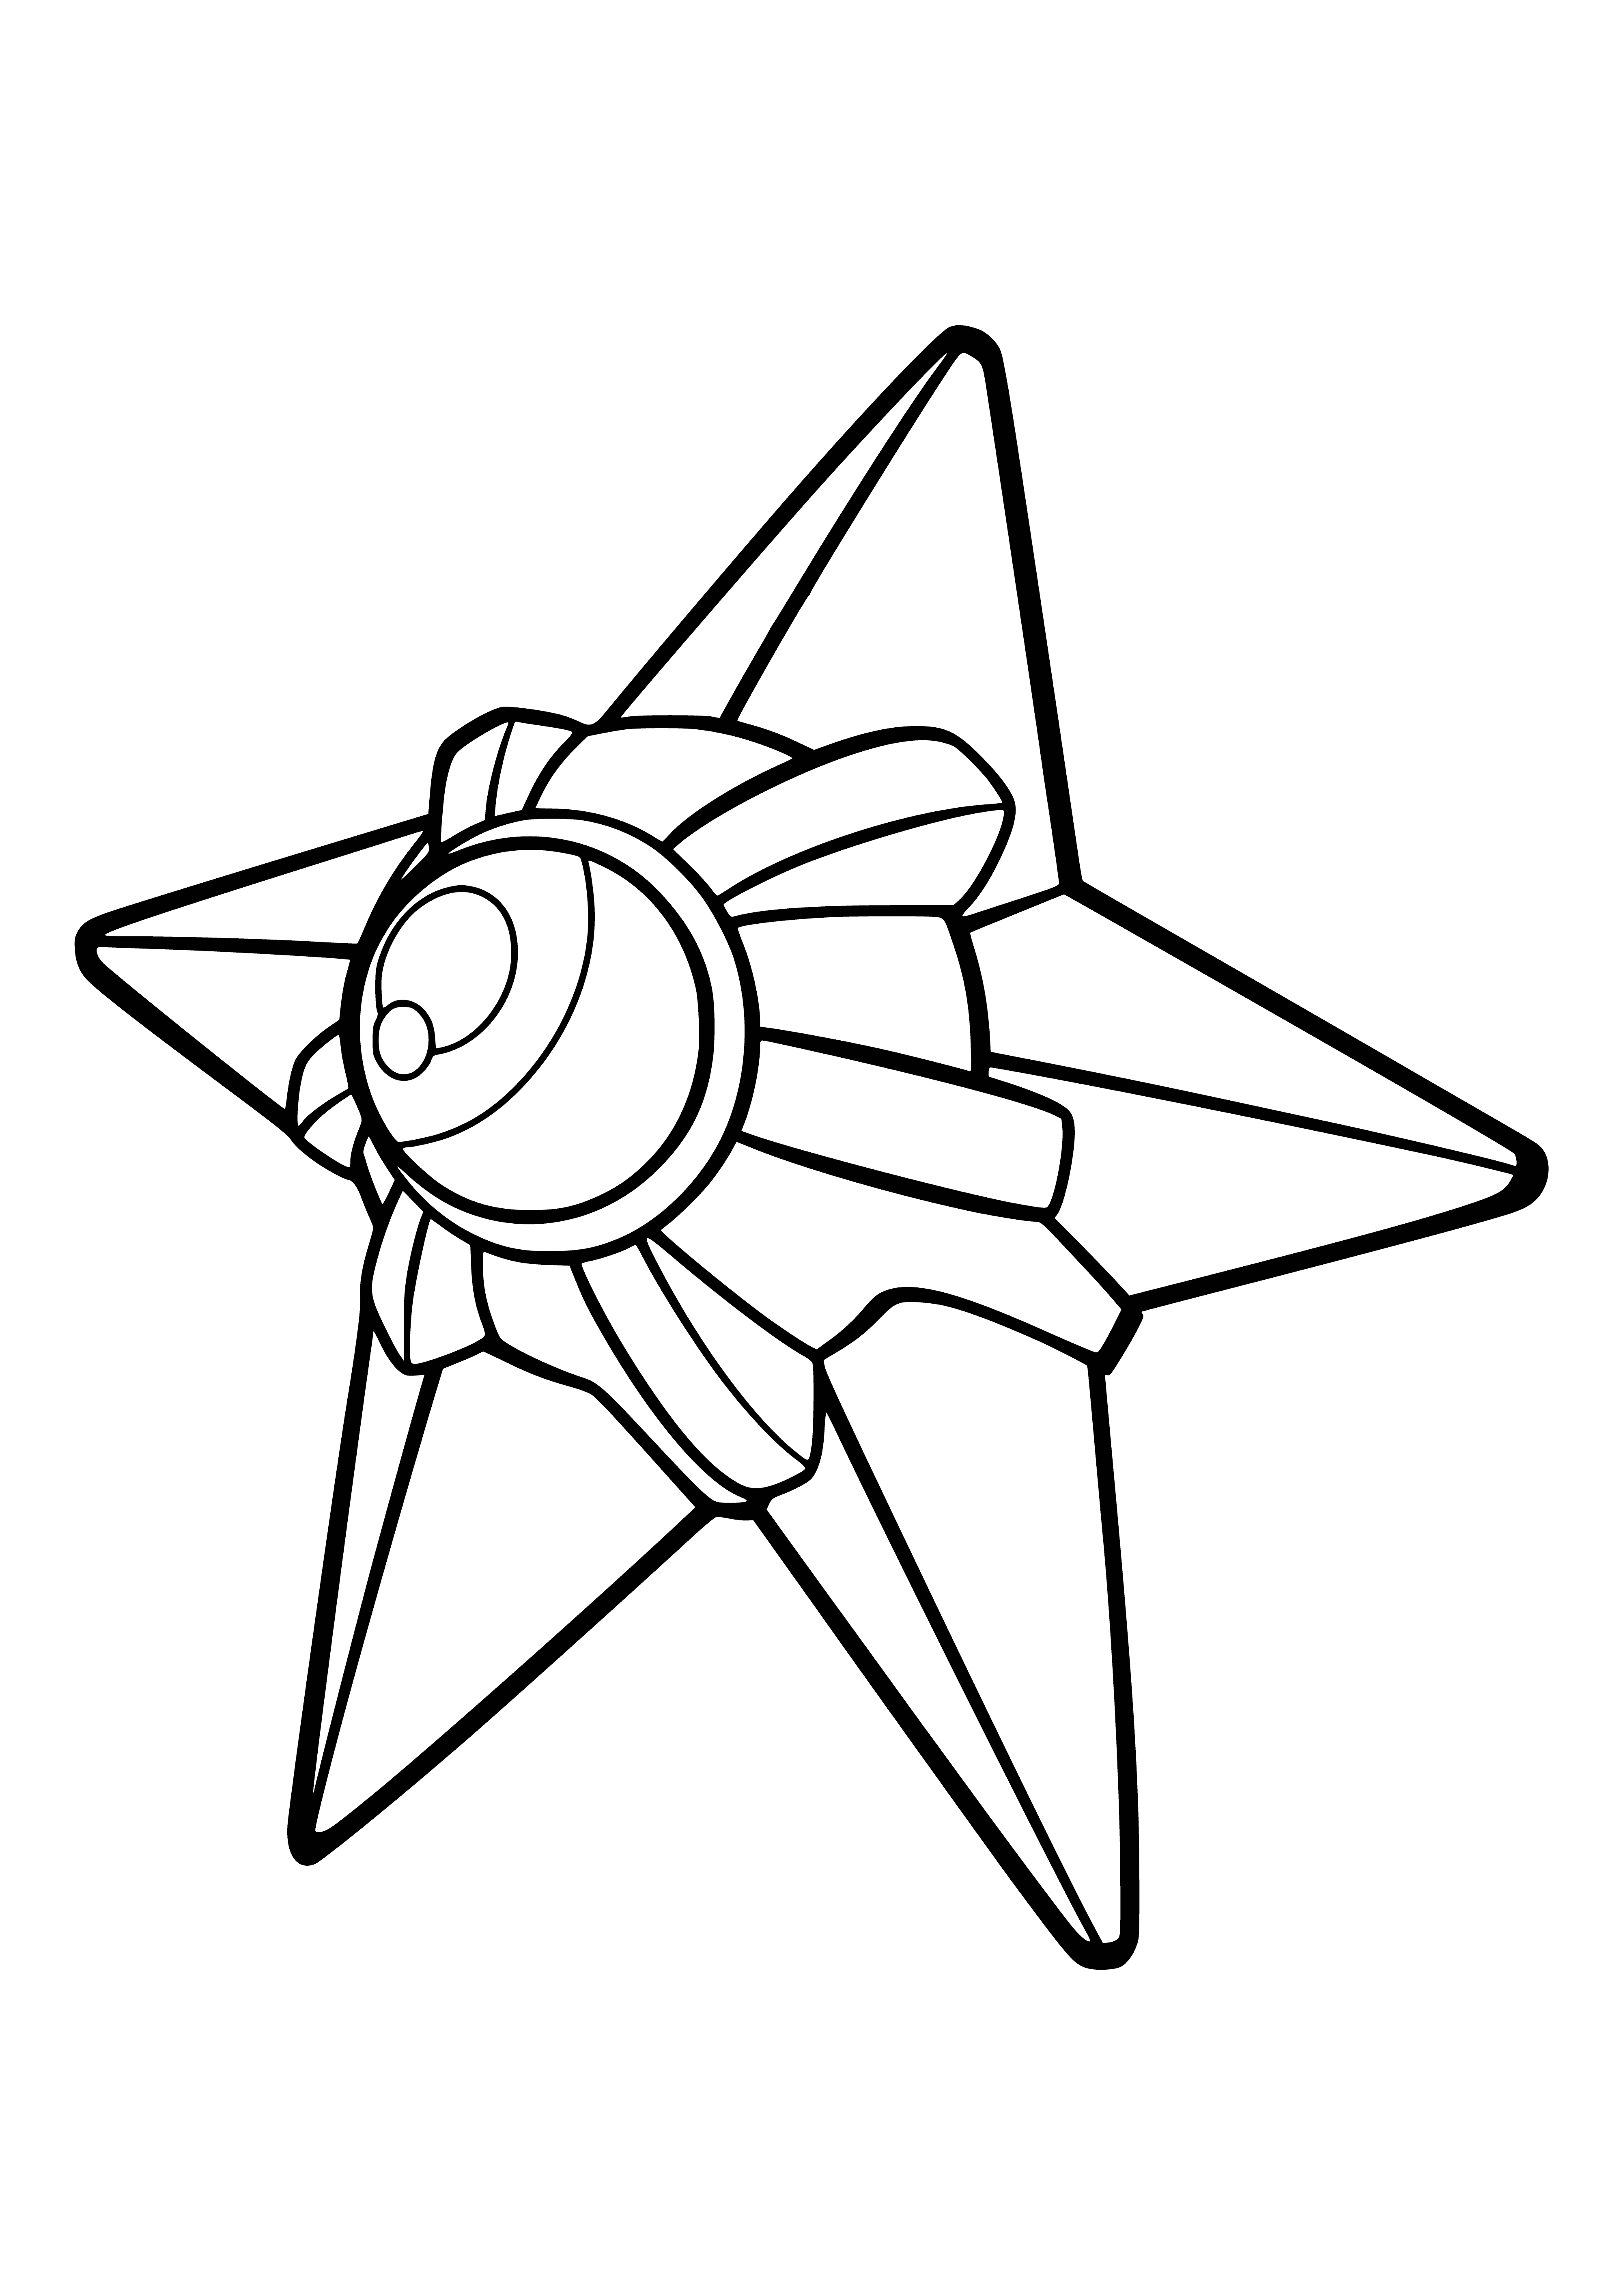 coloring page: Pokémon Staryu is a sea star-shaped Pokémon w/ a golden star on its body. It can emit a powerful beam of light & even regrow its body if cut in half.